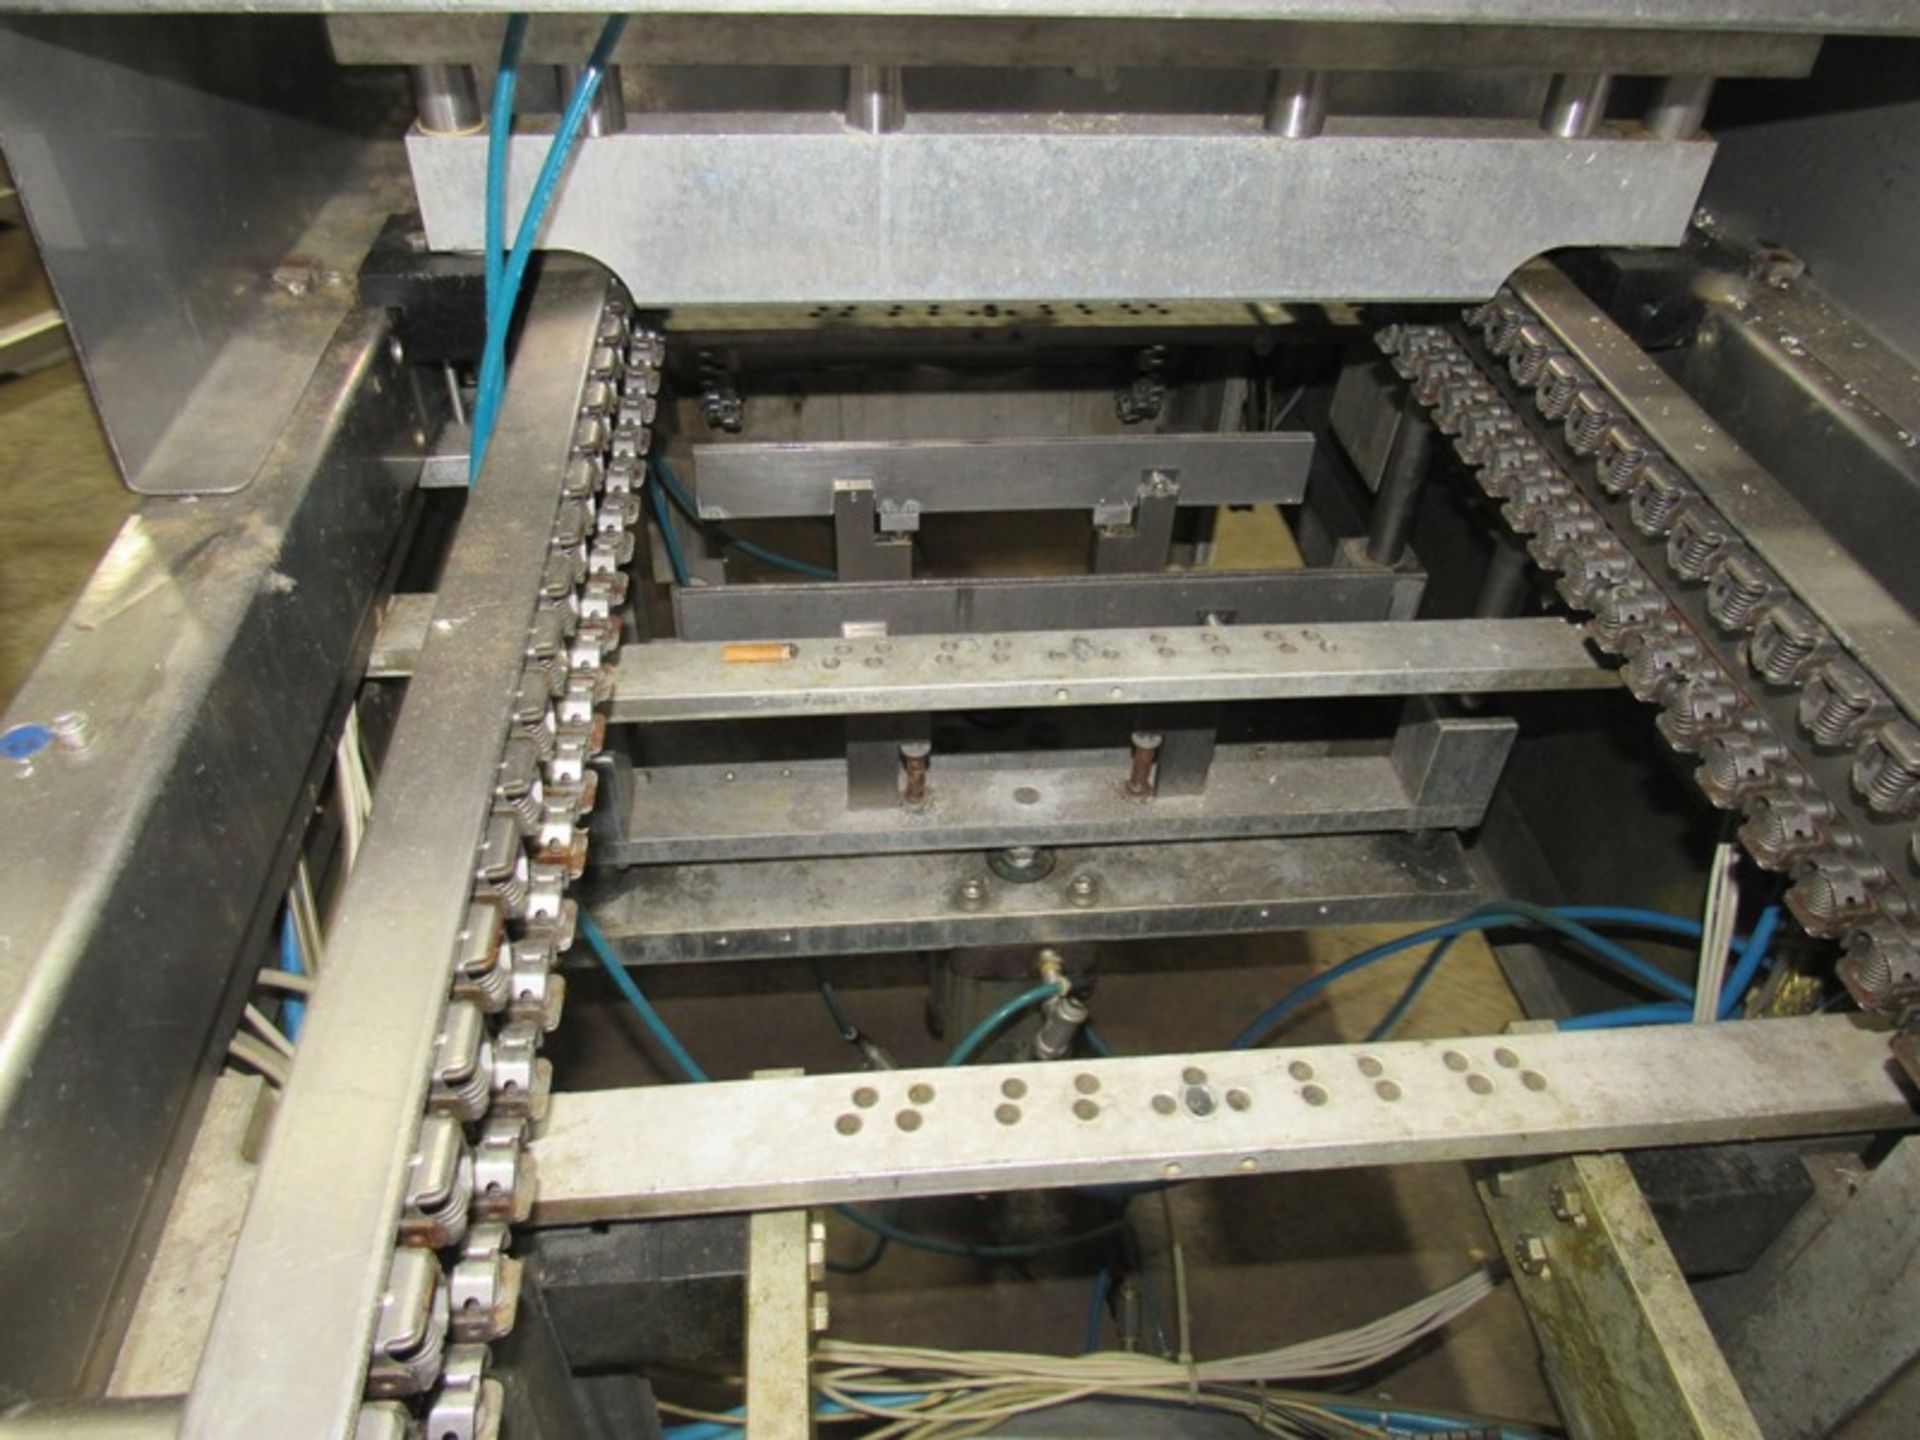 Multivac Rollstock Thermoformer Packaging Machine, 16 5/8" between chains, approx. 13 1/2" - Image 11 of 25